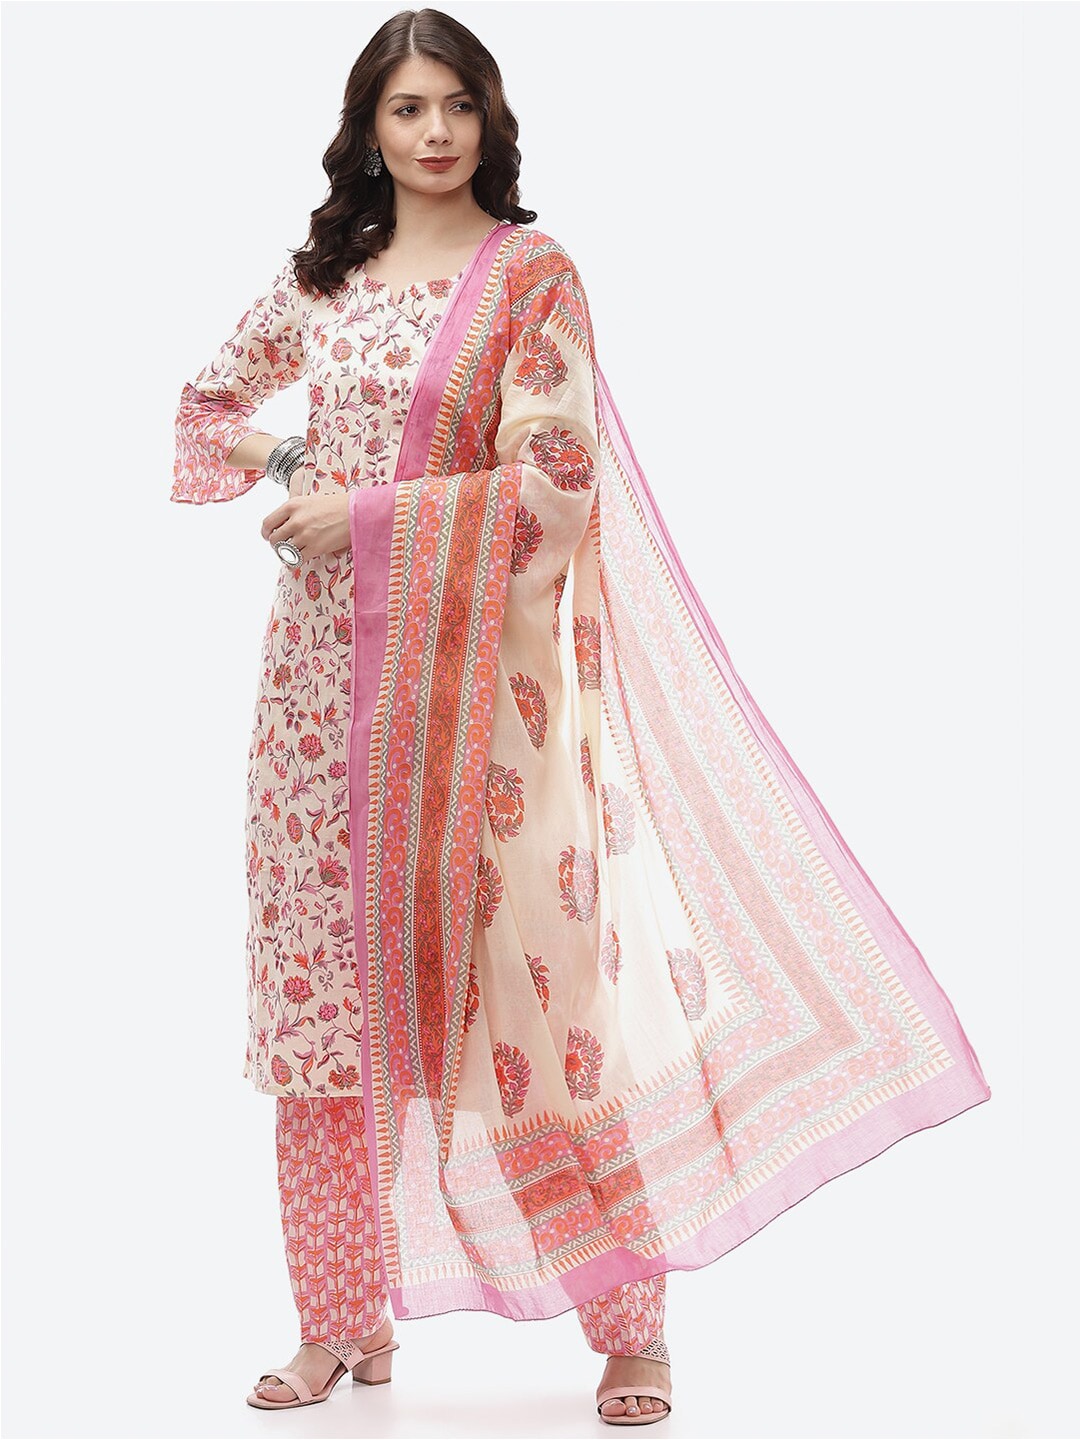 Biba Pink & Cream-Coloured Unstitched Dress Material Price in India